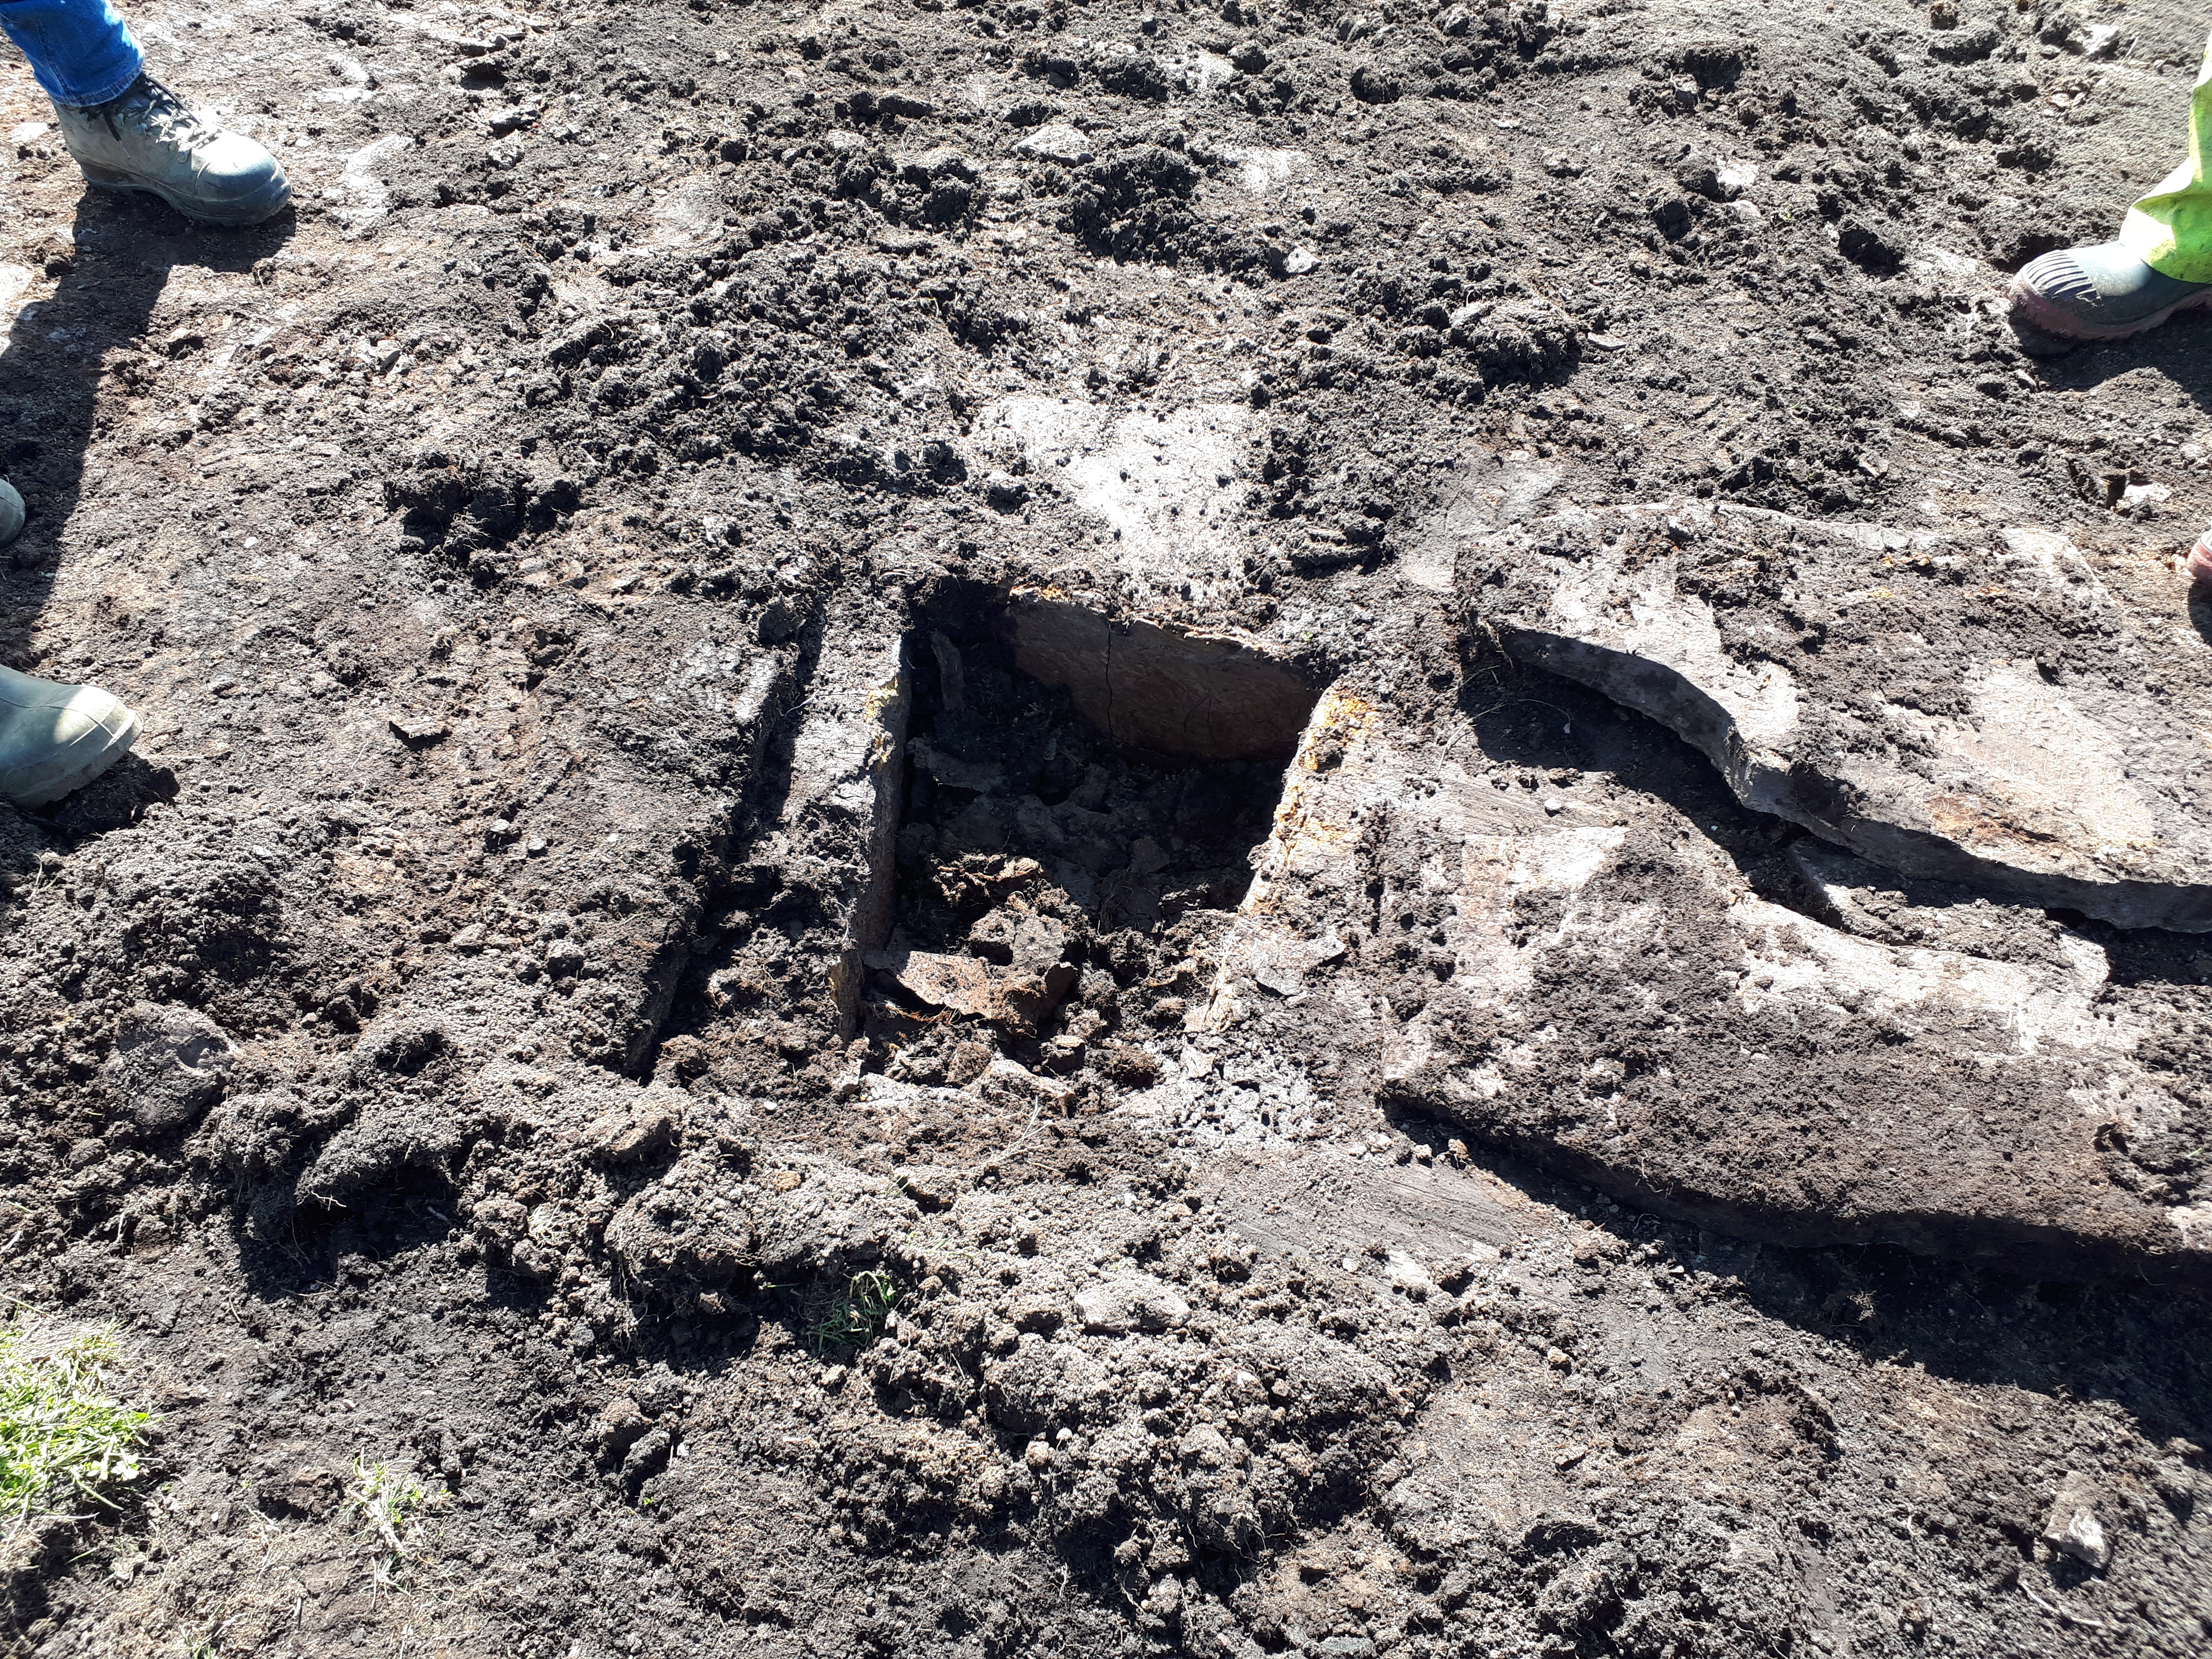 The cist was found intact at the proposed Finstown substation site for SSEN Transmission.